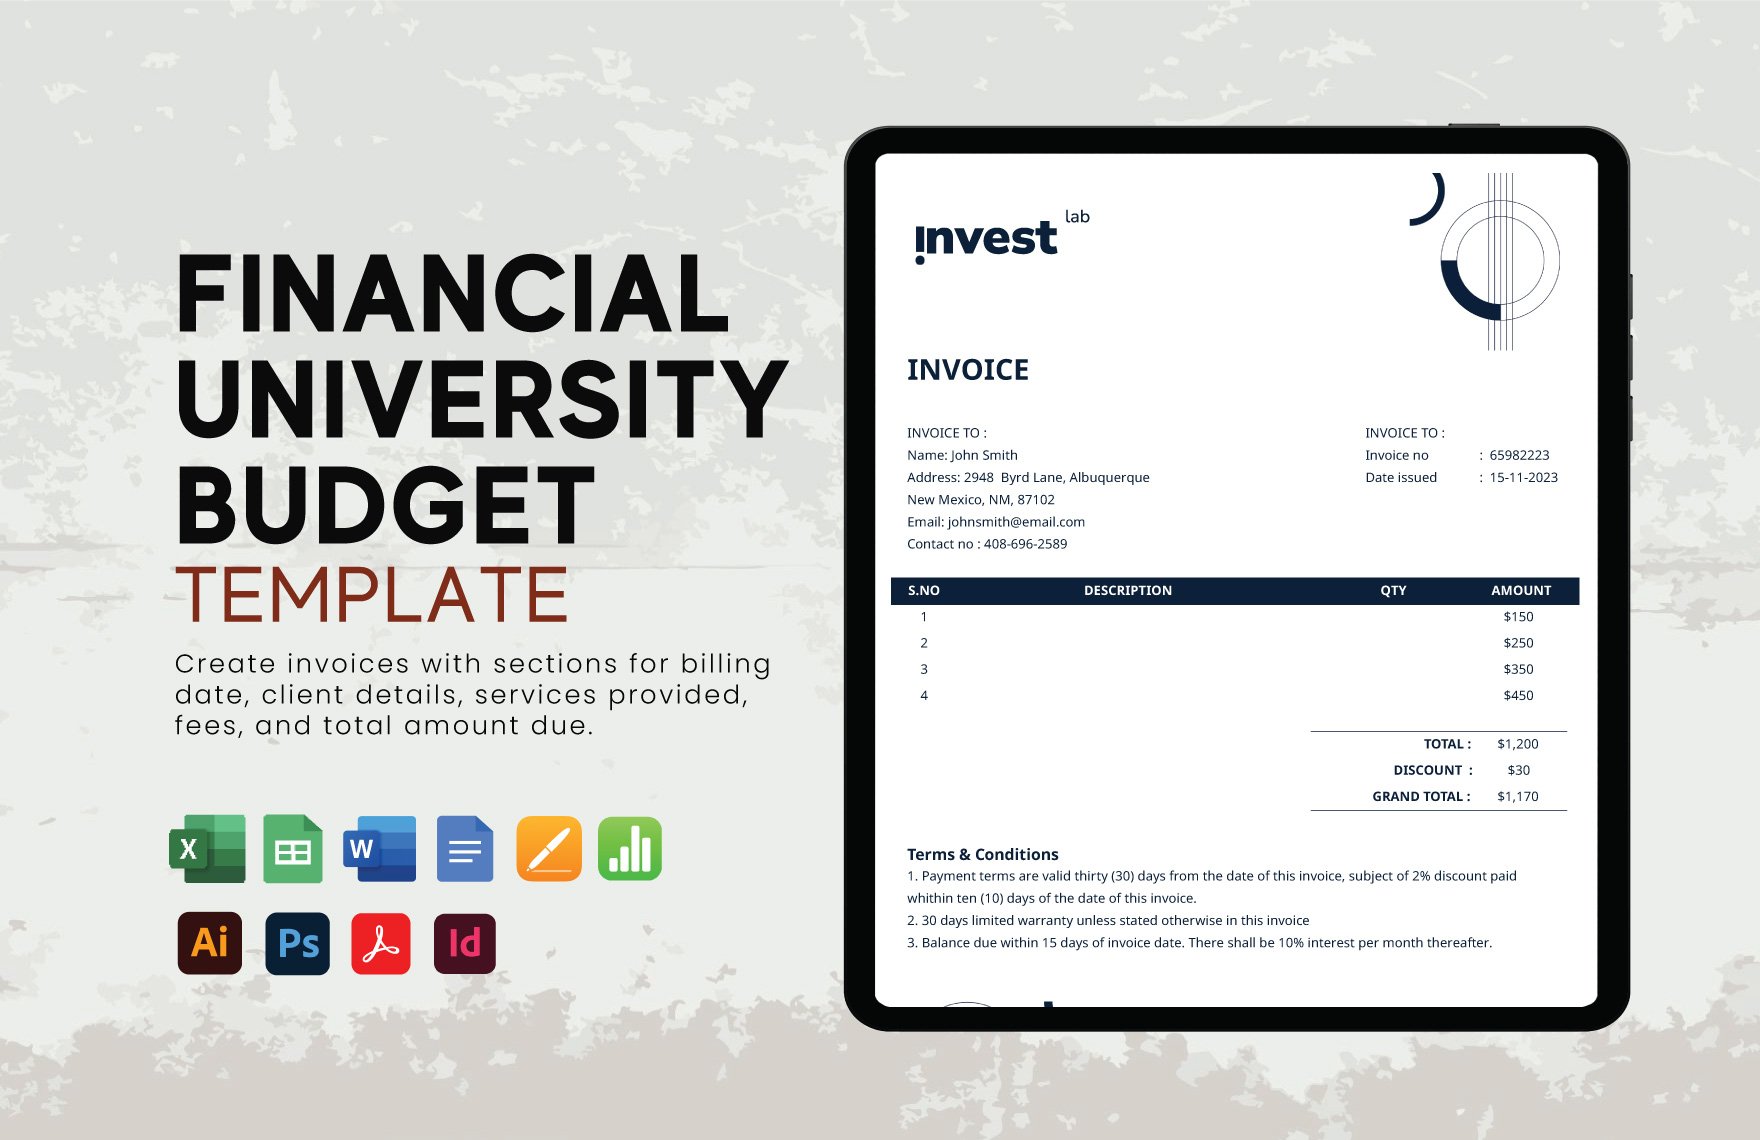 Financial Advisor Invoice Template in Word, Google Docs, Excel, PDF, Google Sheets, Illustrator, PSD, Apple Pages, InDesign, Apple Numbers